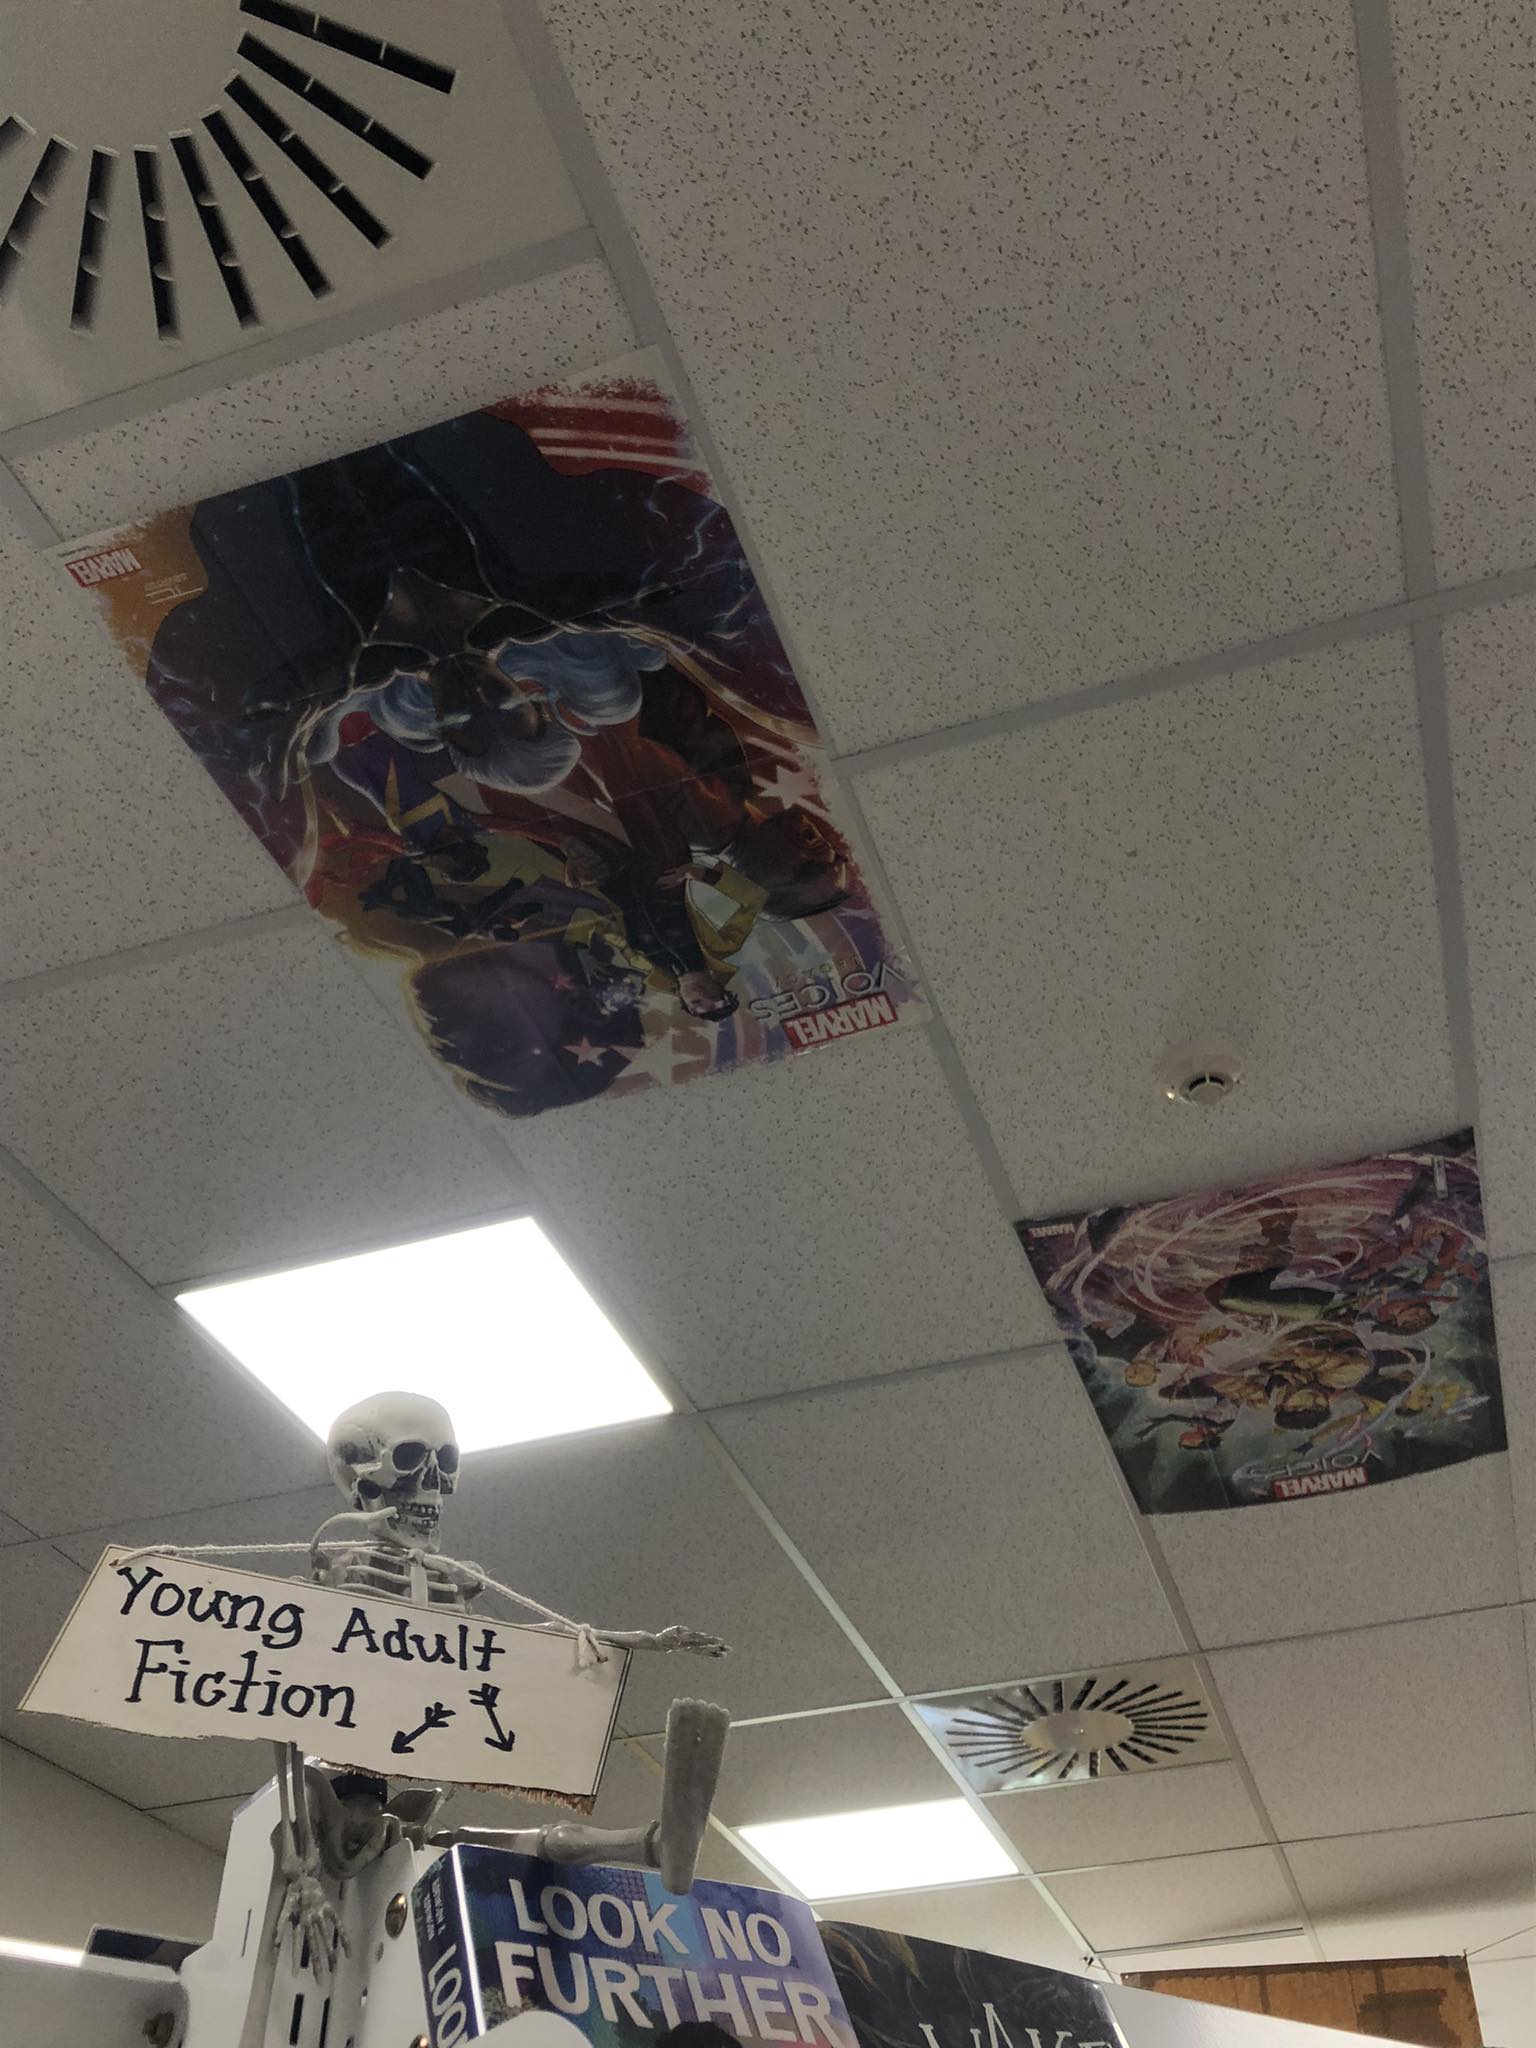 A plastic skeleton perches on a bookshelf with a sign reading 'Young Adult Fiction'. On the ceiling tiles above are movie posters.